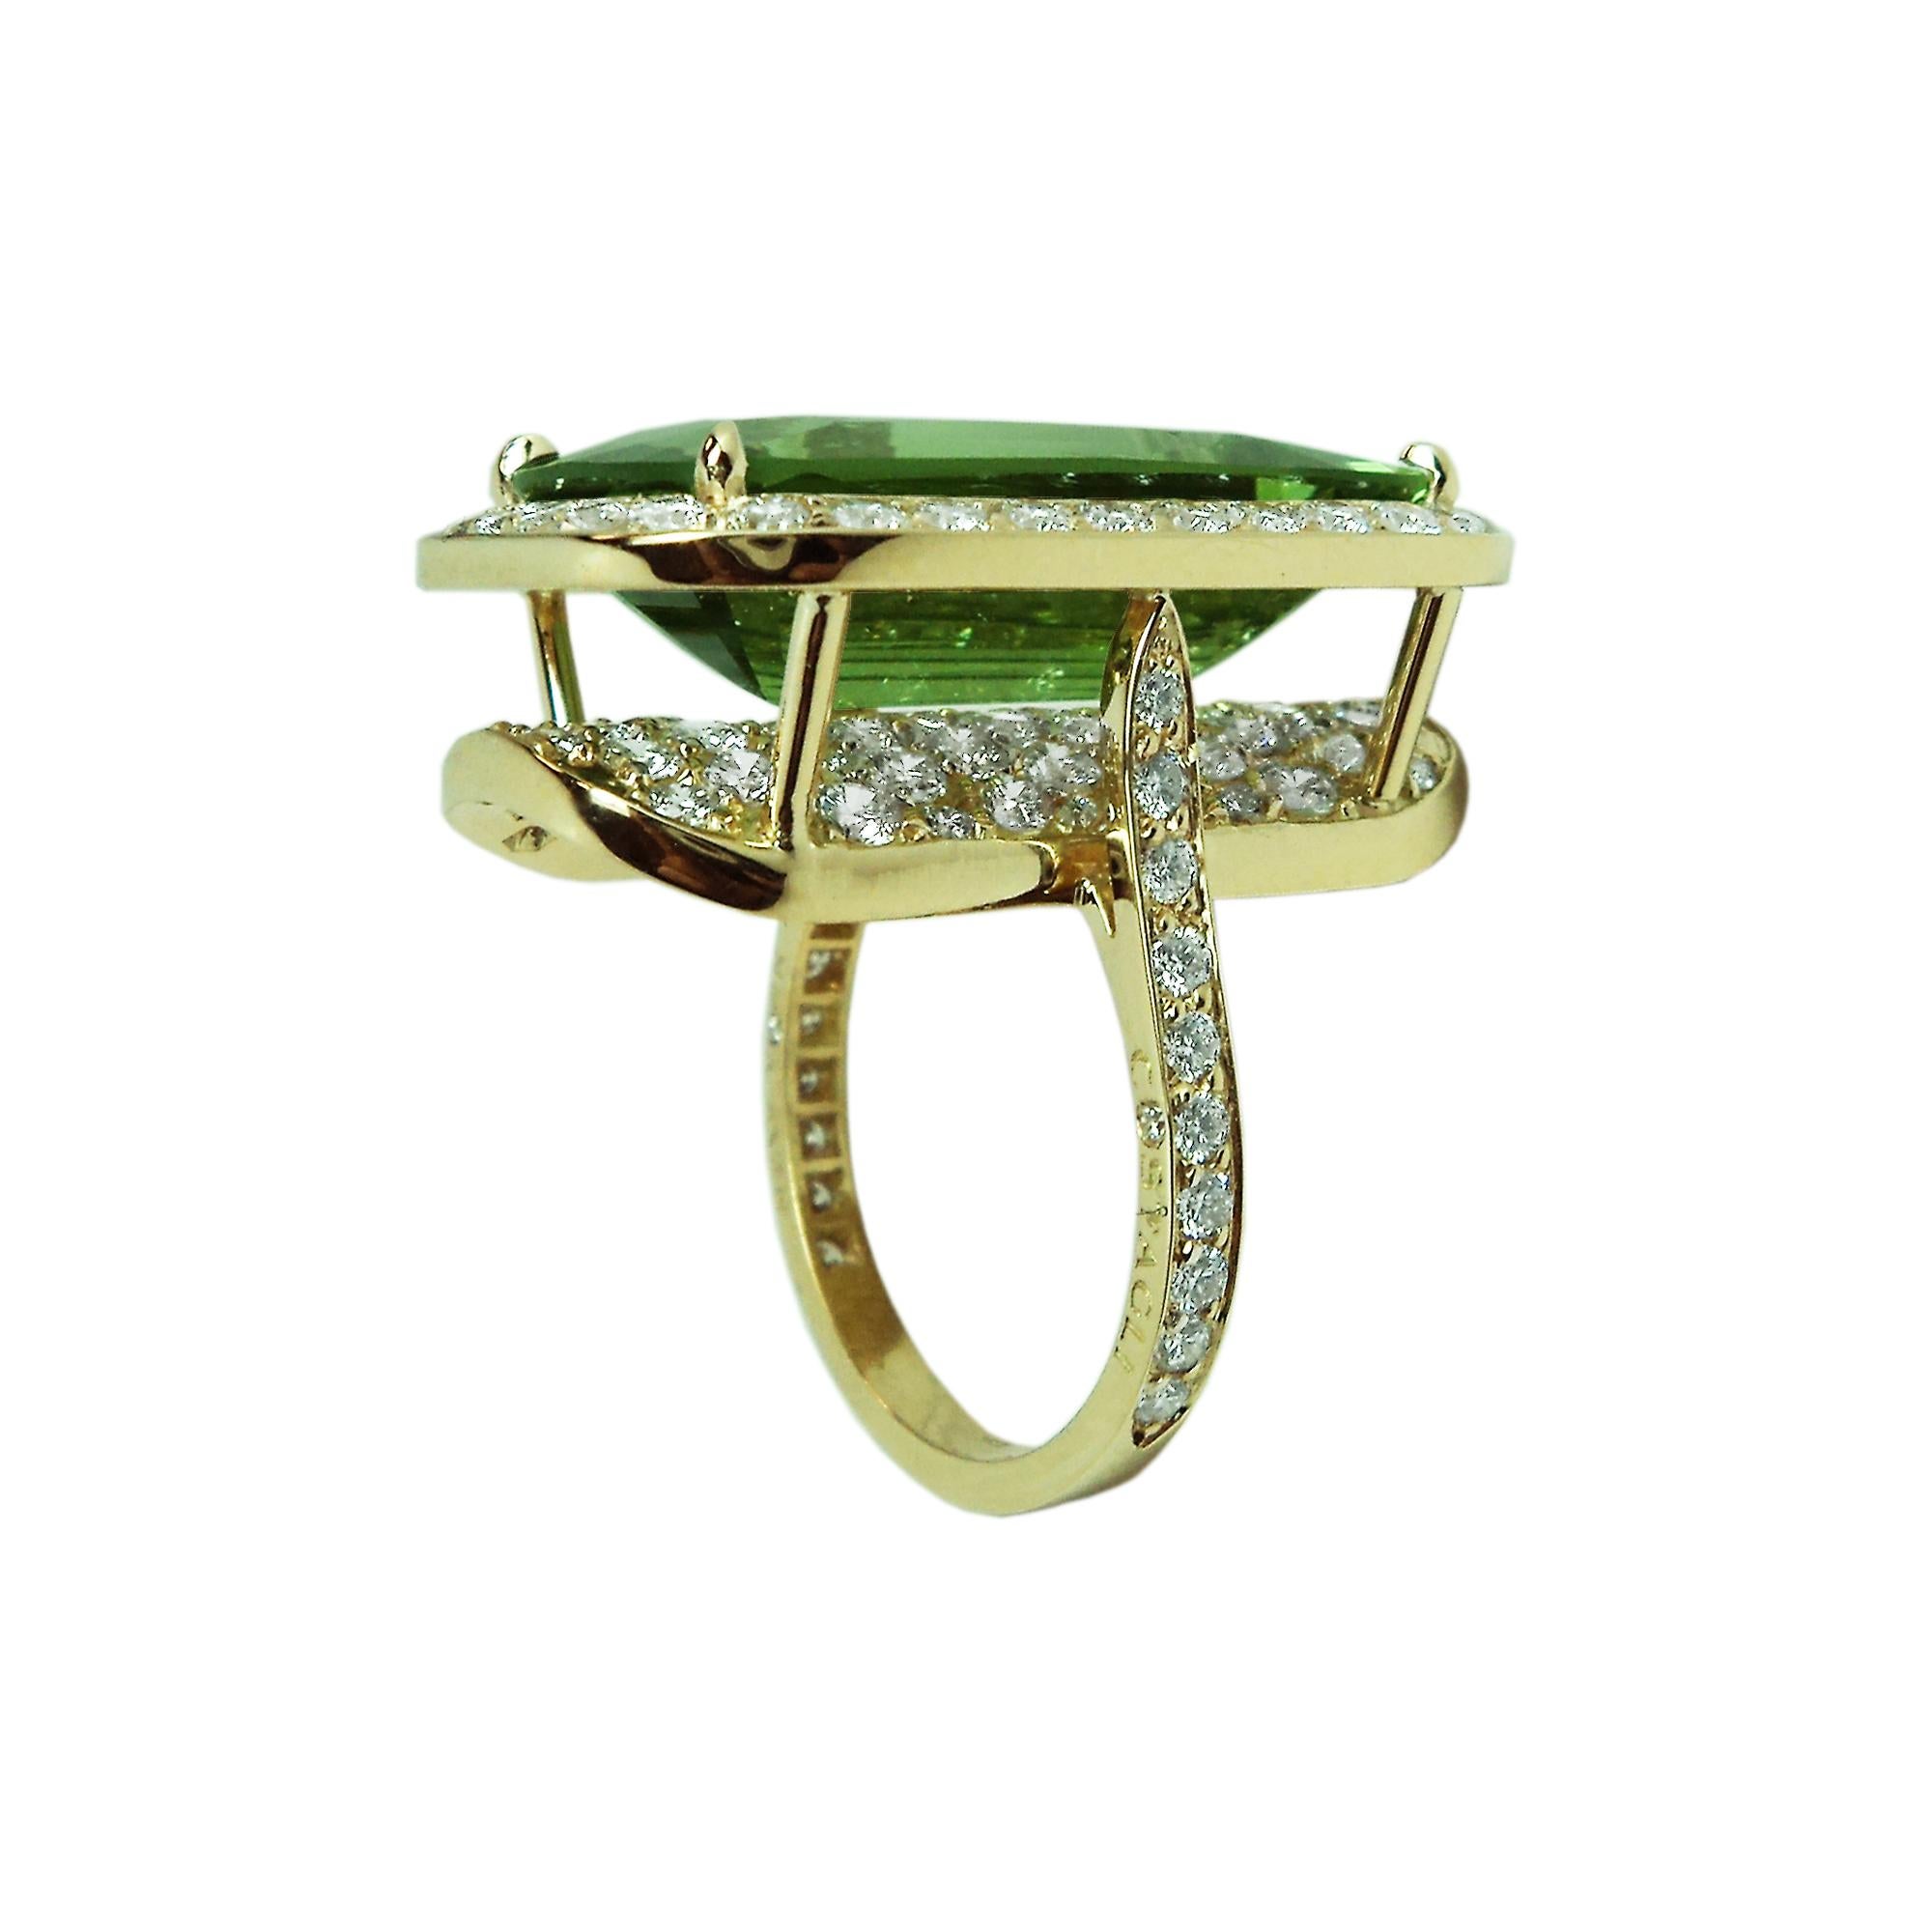 18kt yellow gold ring set with an emerald-cut peridot mounted above pave-set round brilliant diamonds.

The Valentina collection debuted in 2013, shocking the jewelry community with an innovative way to see diamonds- through a colorful gemstone.